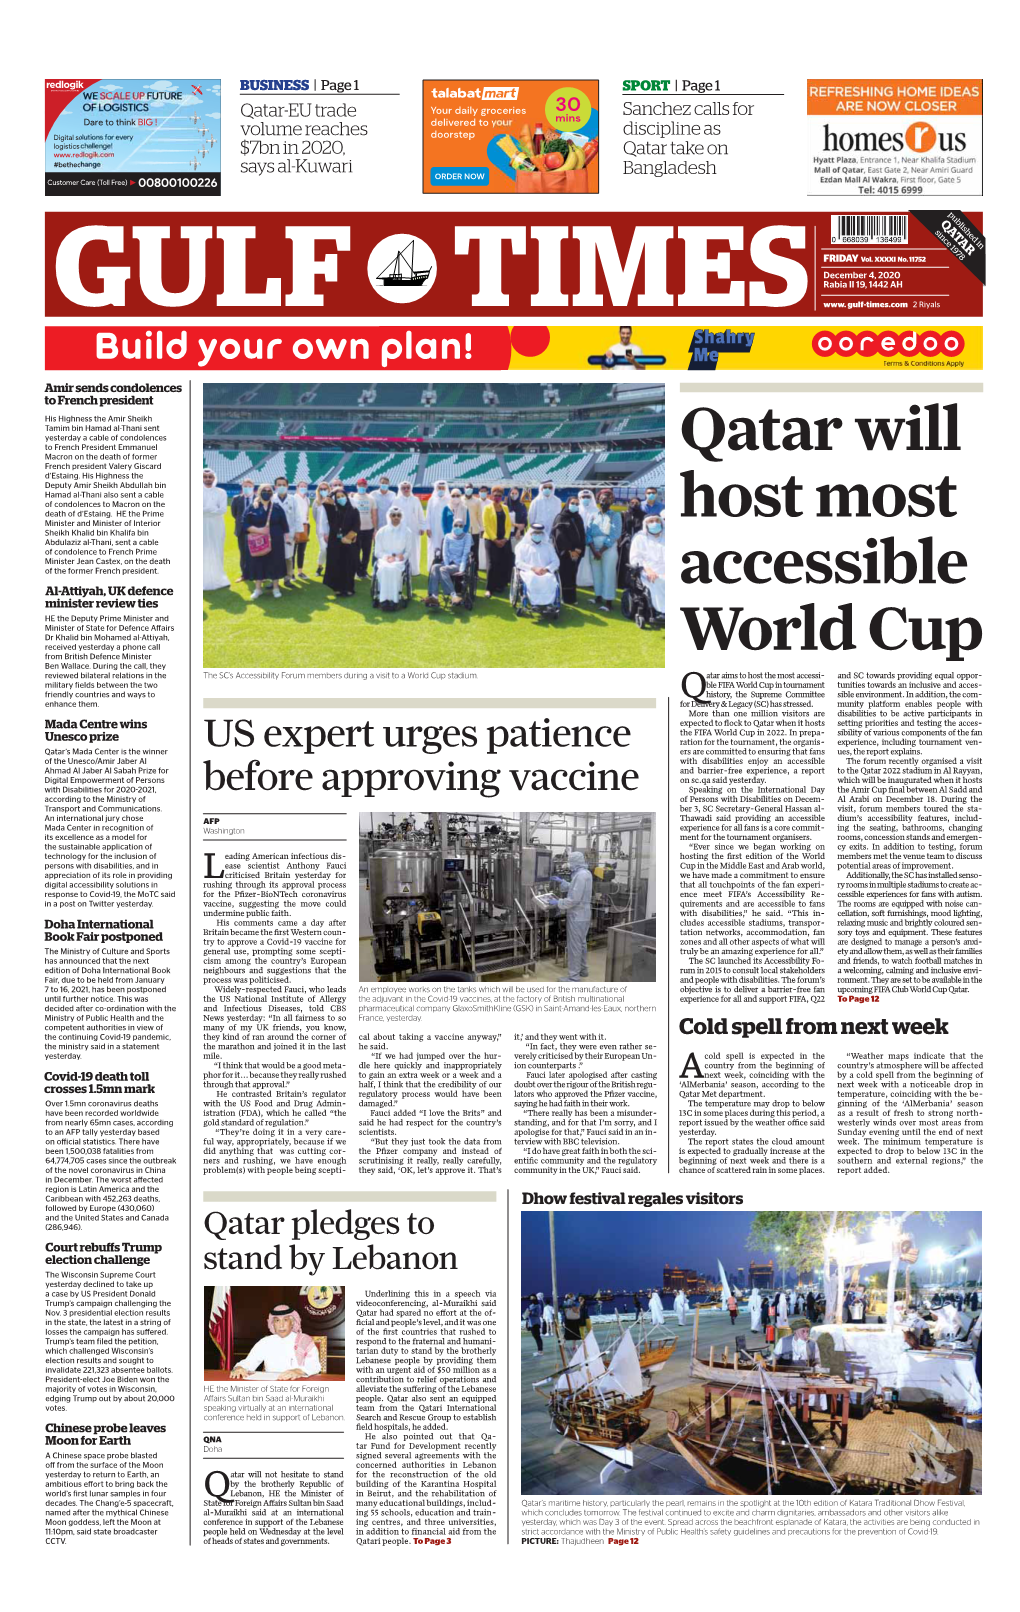 Qatar Will Host Most Accessible World Cup